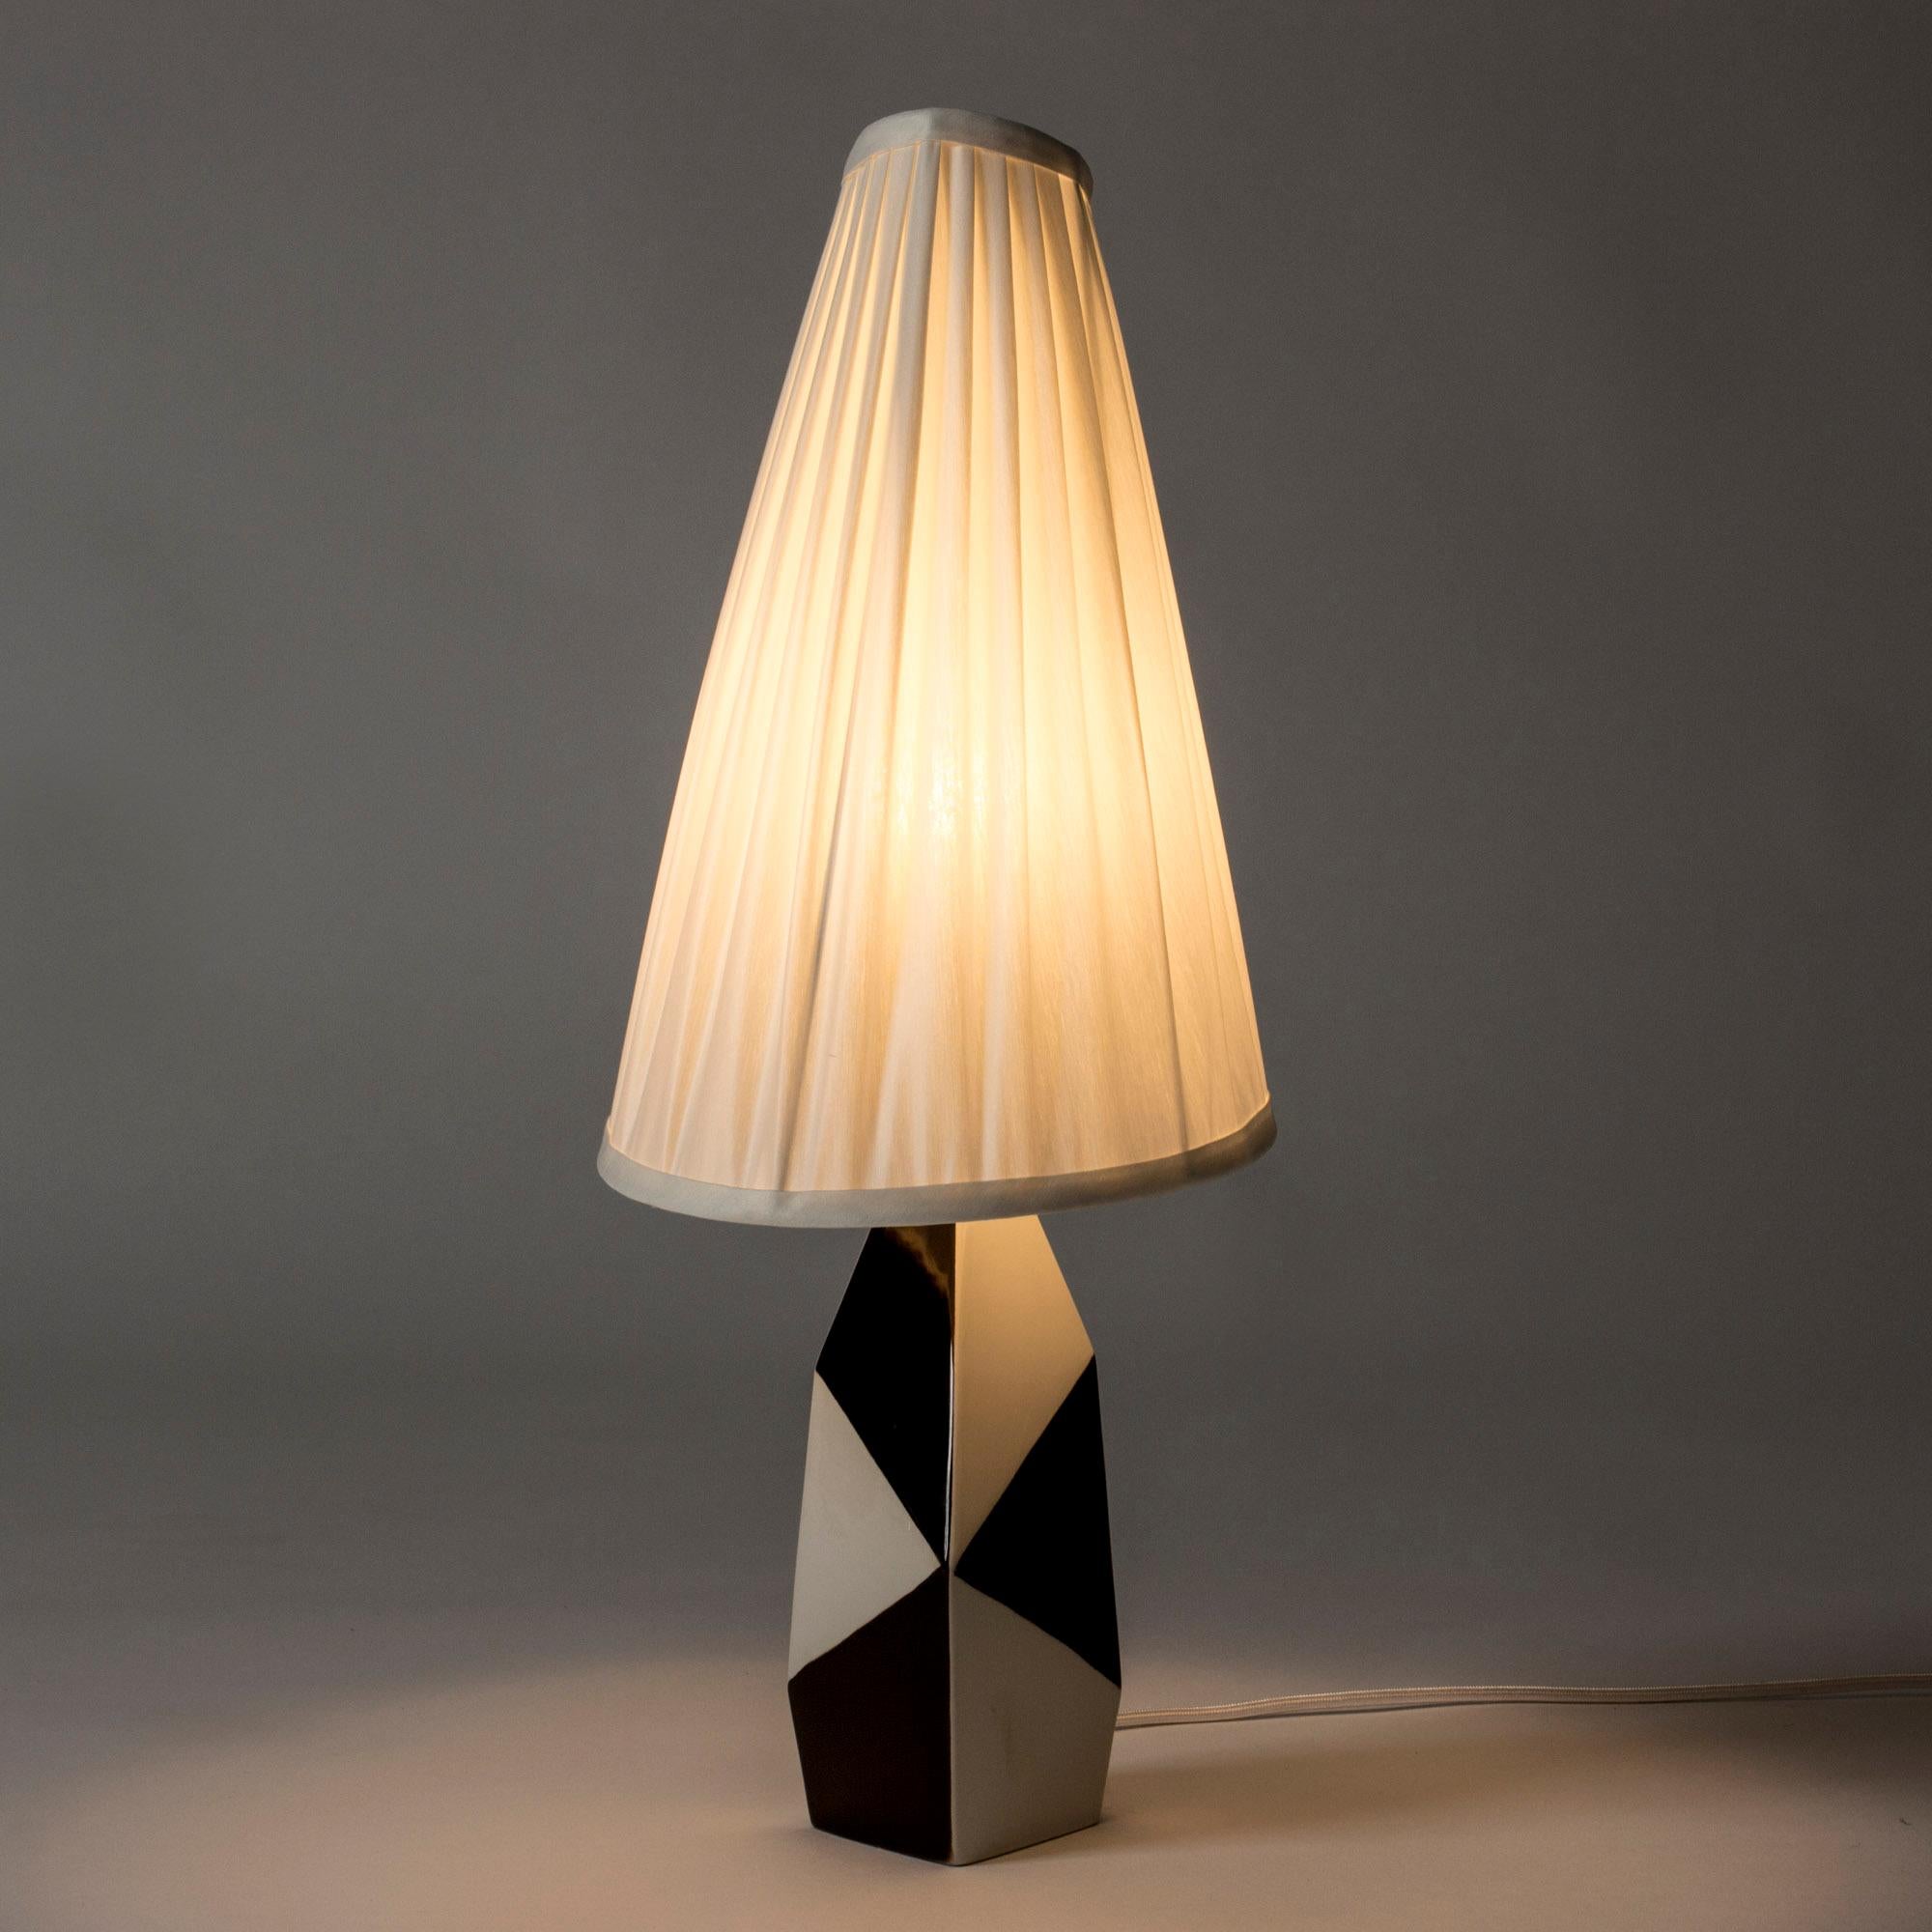 Amazing stoneware table lamp by Carl-Harry Stålhane. Graphical, sculptural body with striking black and white decor. Asymmetric, pleated shade.

Carl-Harry Stålhane was one of the stars among Swedish ceramic artists during the 1950s, 1960s and